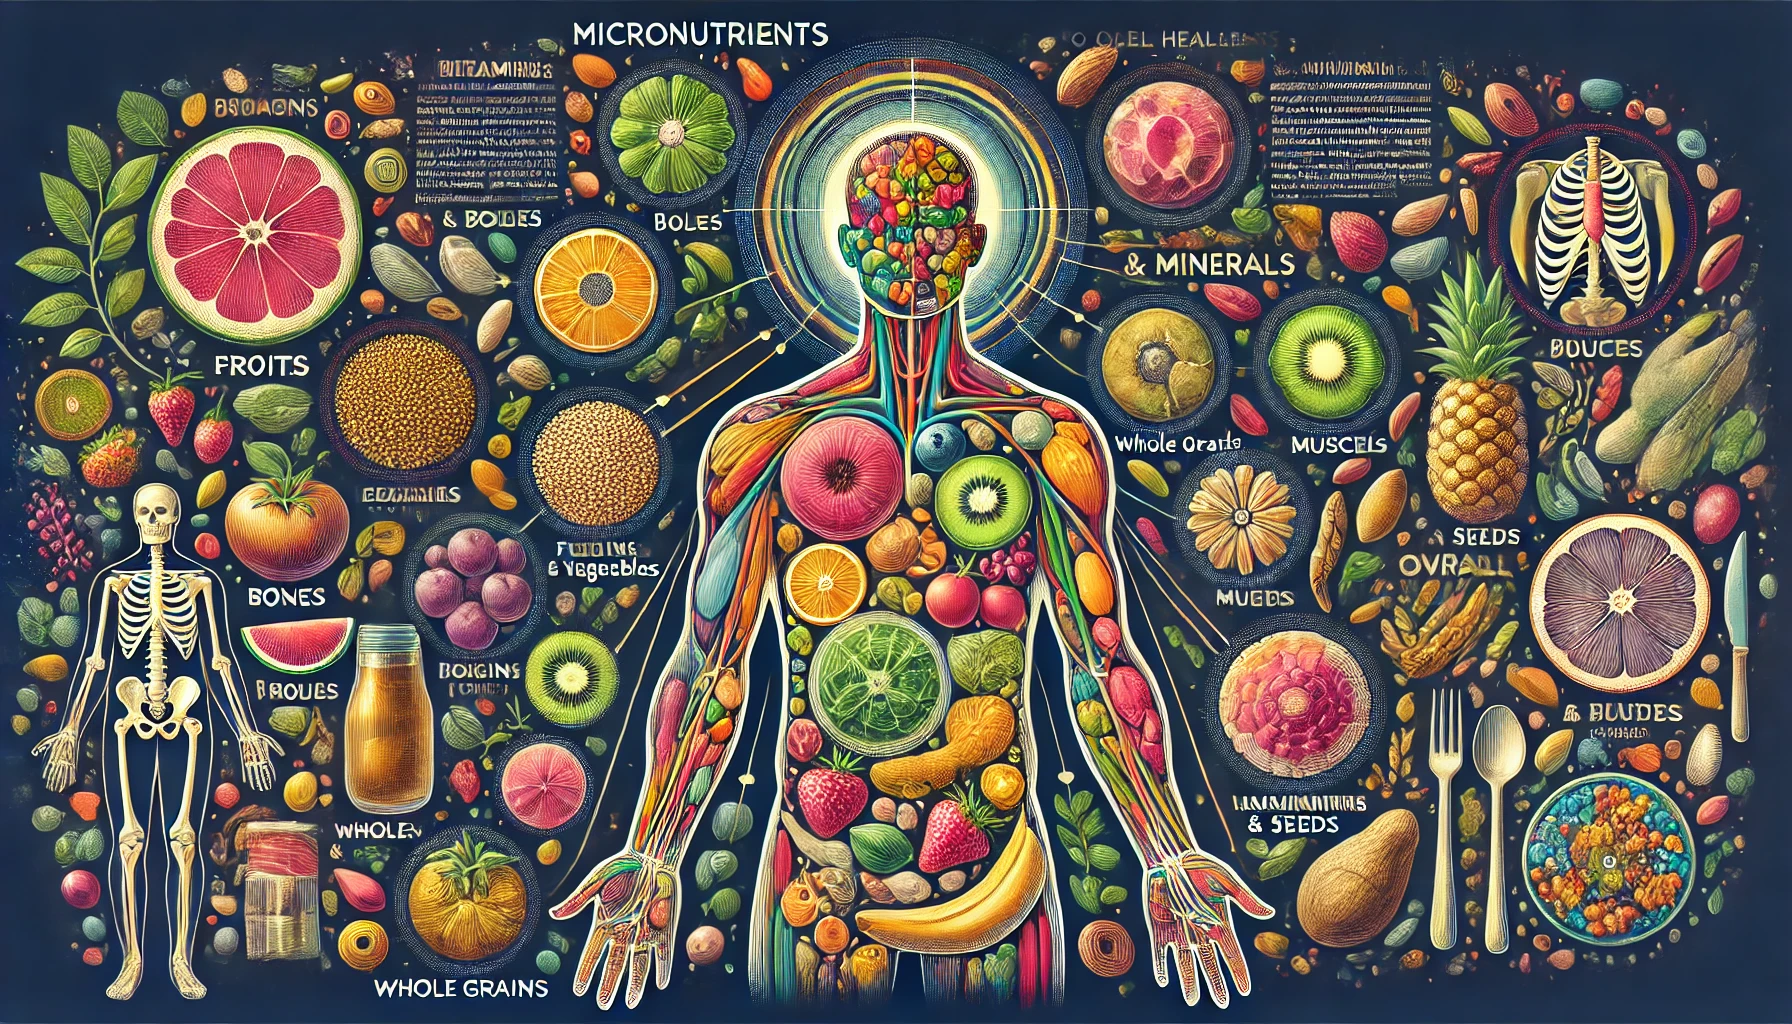 Why Are Micronutrients Essential for Overall Health?